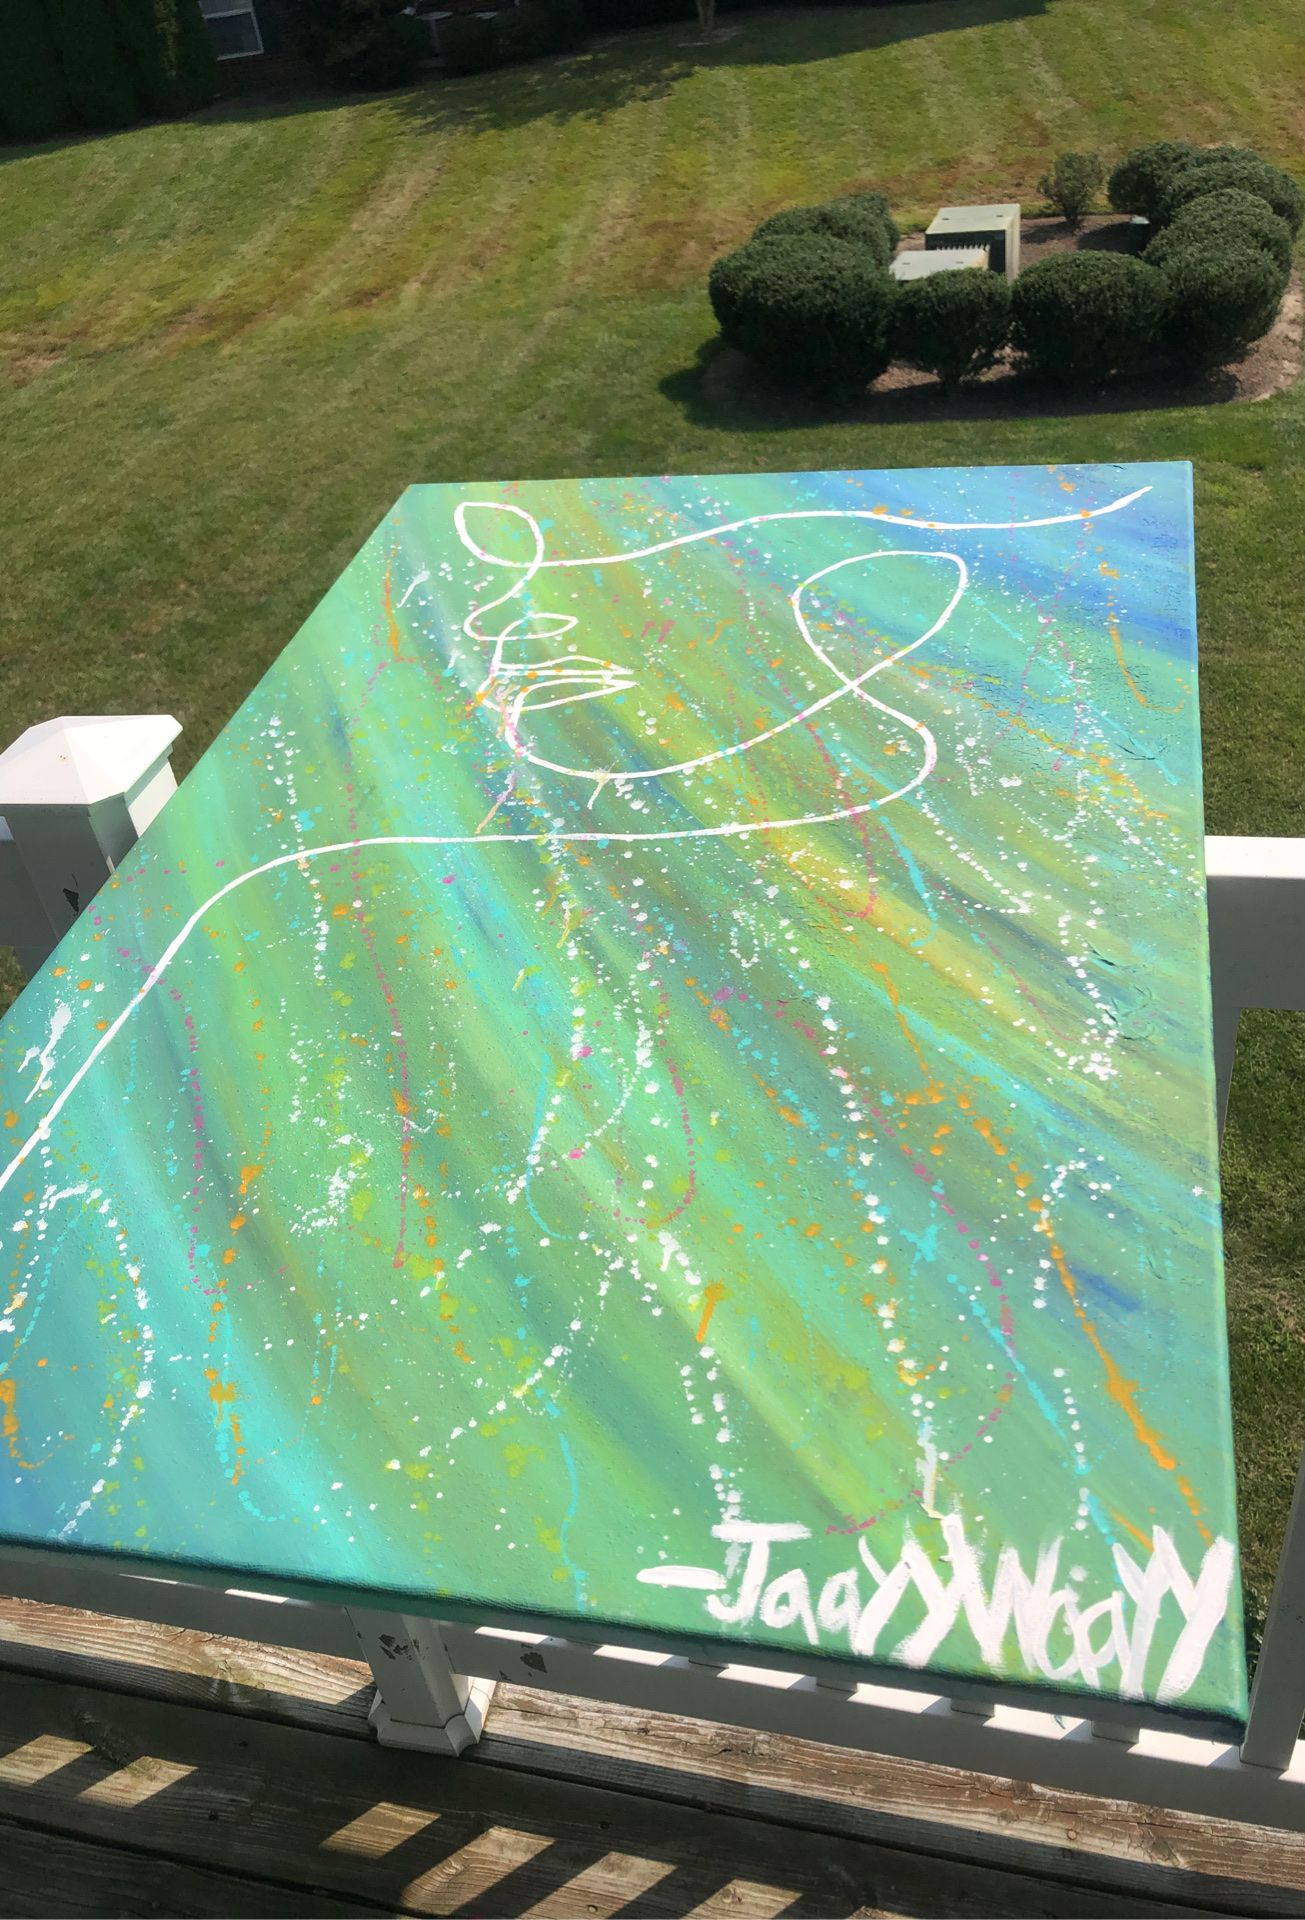 Abstract jaayywaayy painting (NEW)